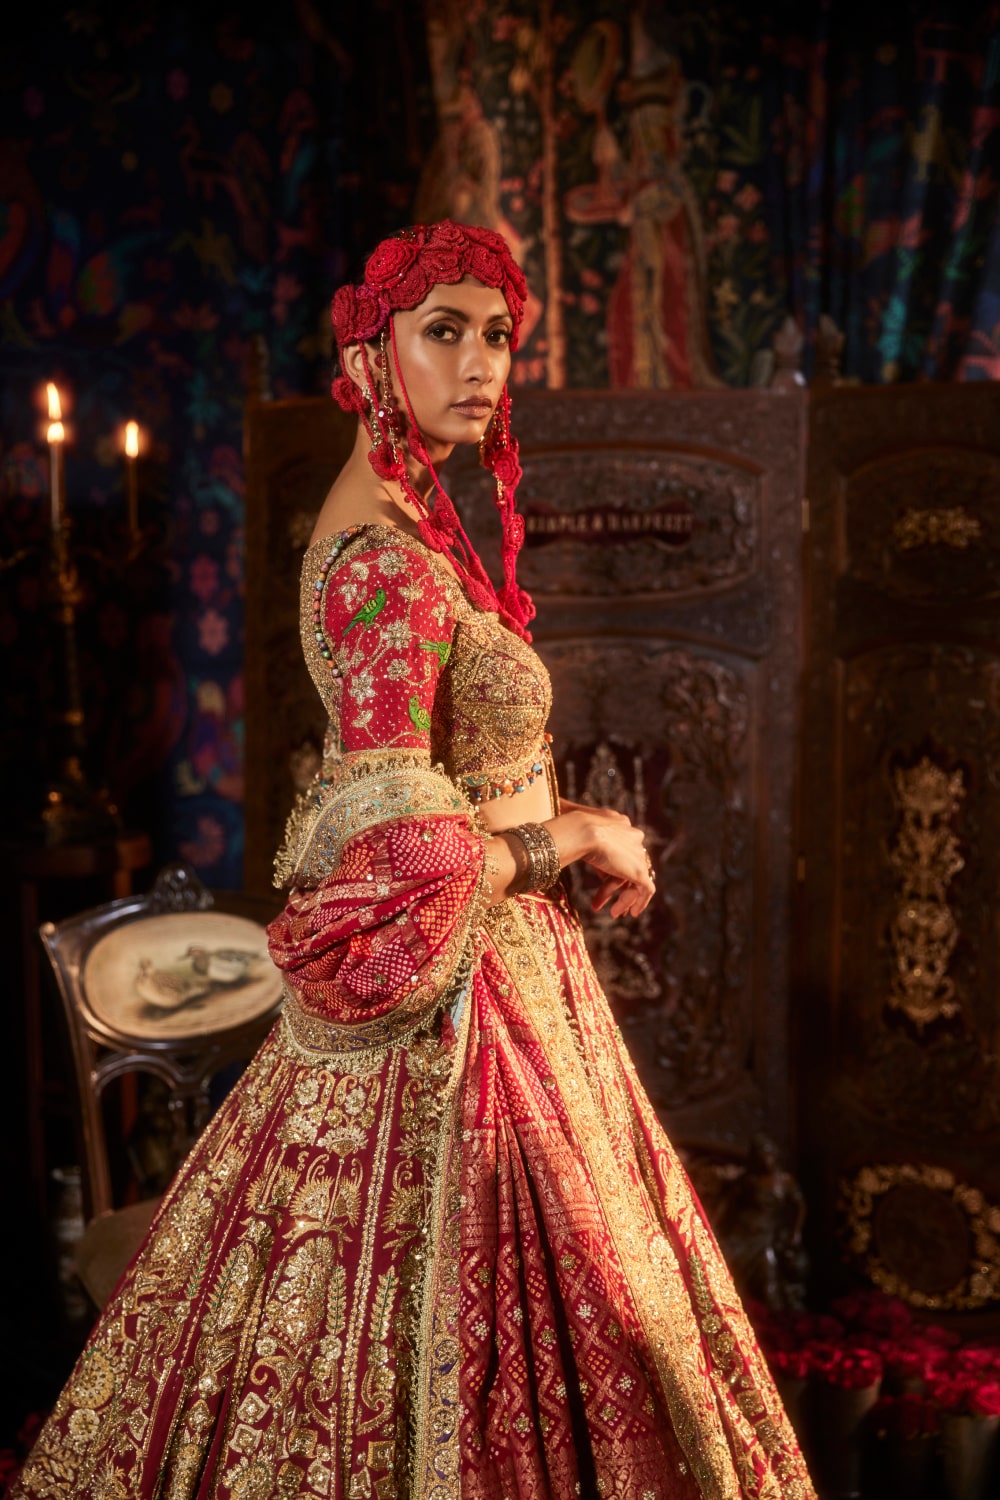 Pomegranate Lehenga with Peacocks and Floral Bouquets